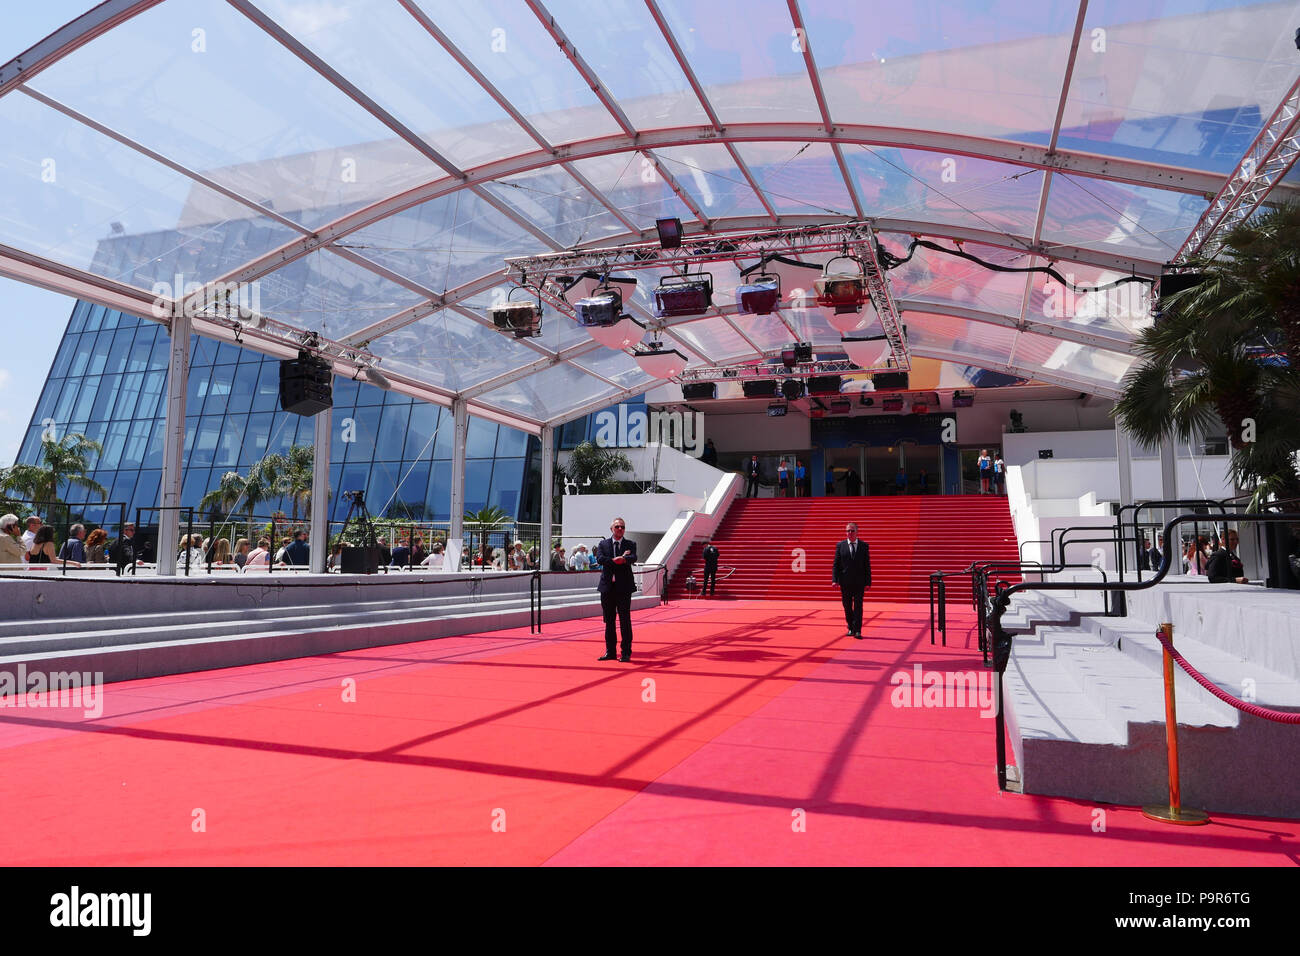 CANNES, FRANCE-MAY 14: Stair of Festival Palace shown on may, 2018 in Cannes, France. The red carpet for the famous ascent of steps of artists of the International Film Festival. Stock Photo